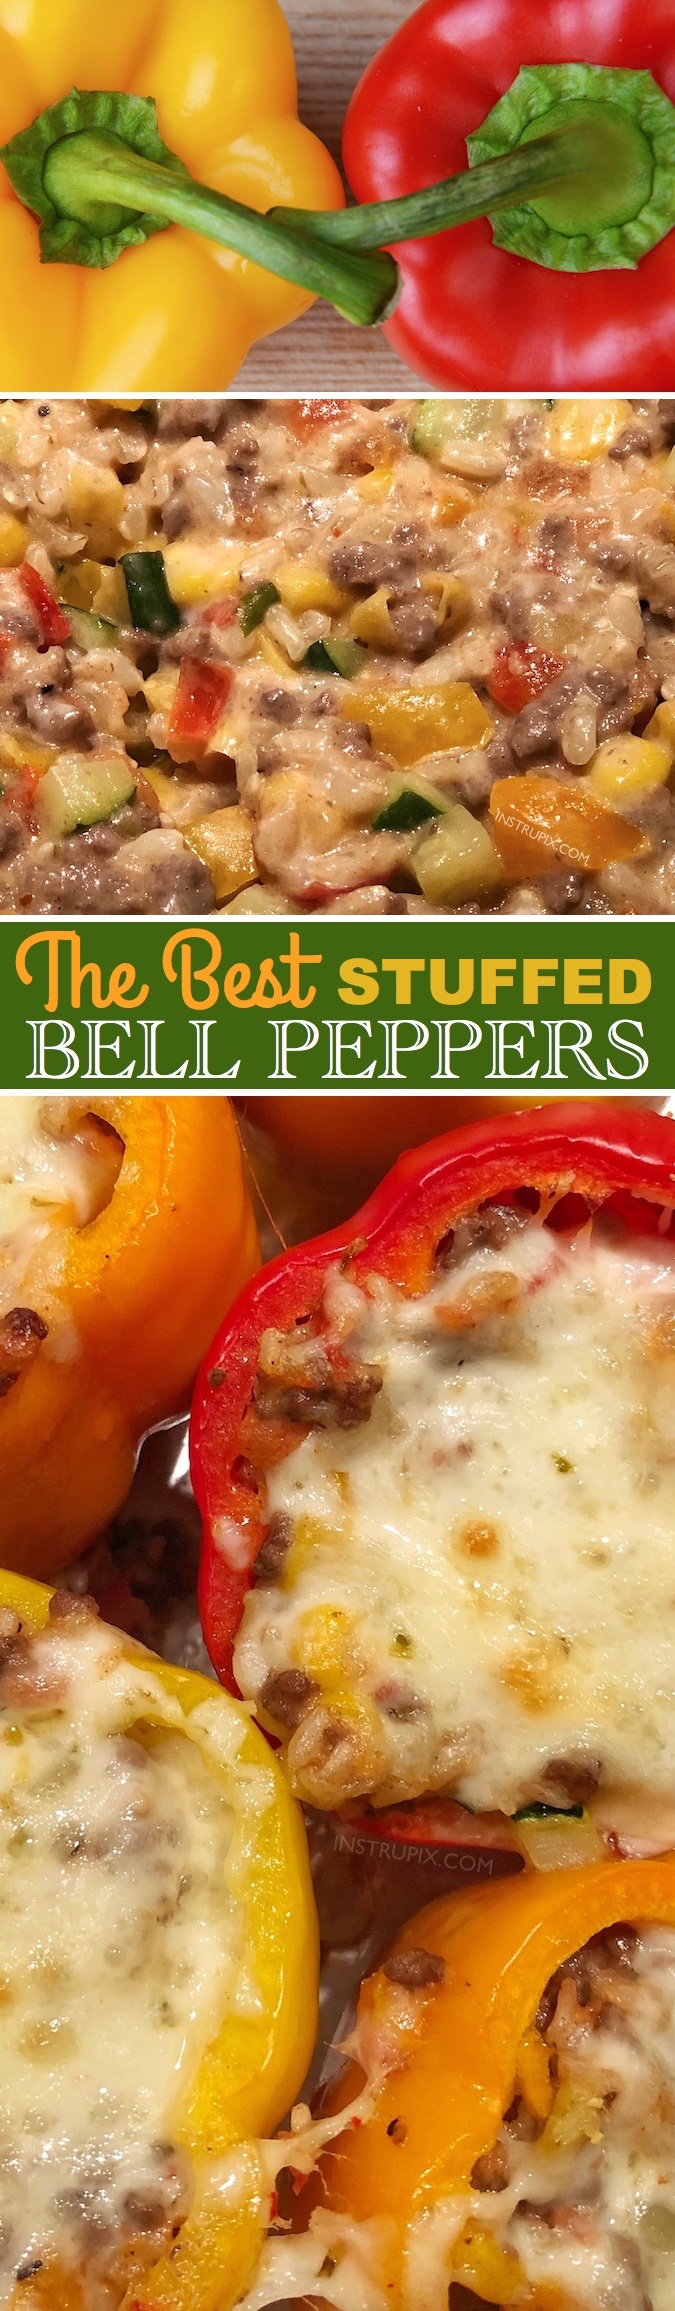 The BEST easy stuffed bell peppers recipe, ever! Using ground beef (or ground turkey), cheese, garlic, zucchini, corn, tomatoes and rice! Gluten free! Bake them in the oven, and enjoy this easy and healthy dinner recipe for the family. Instrupix.com